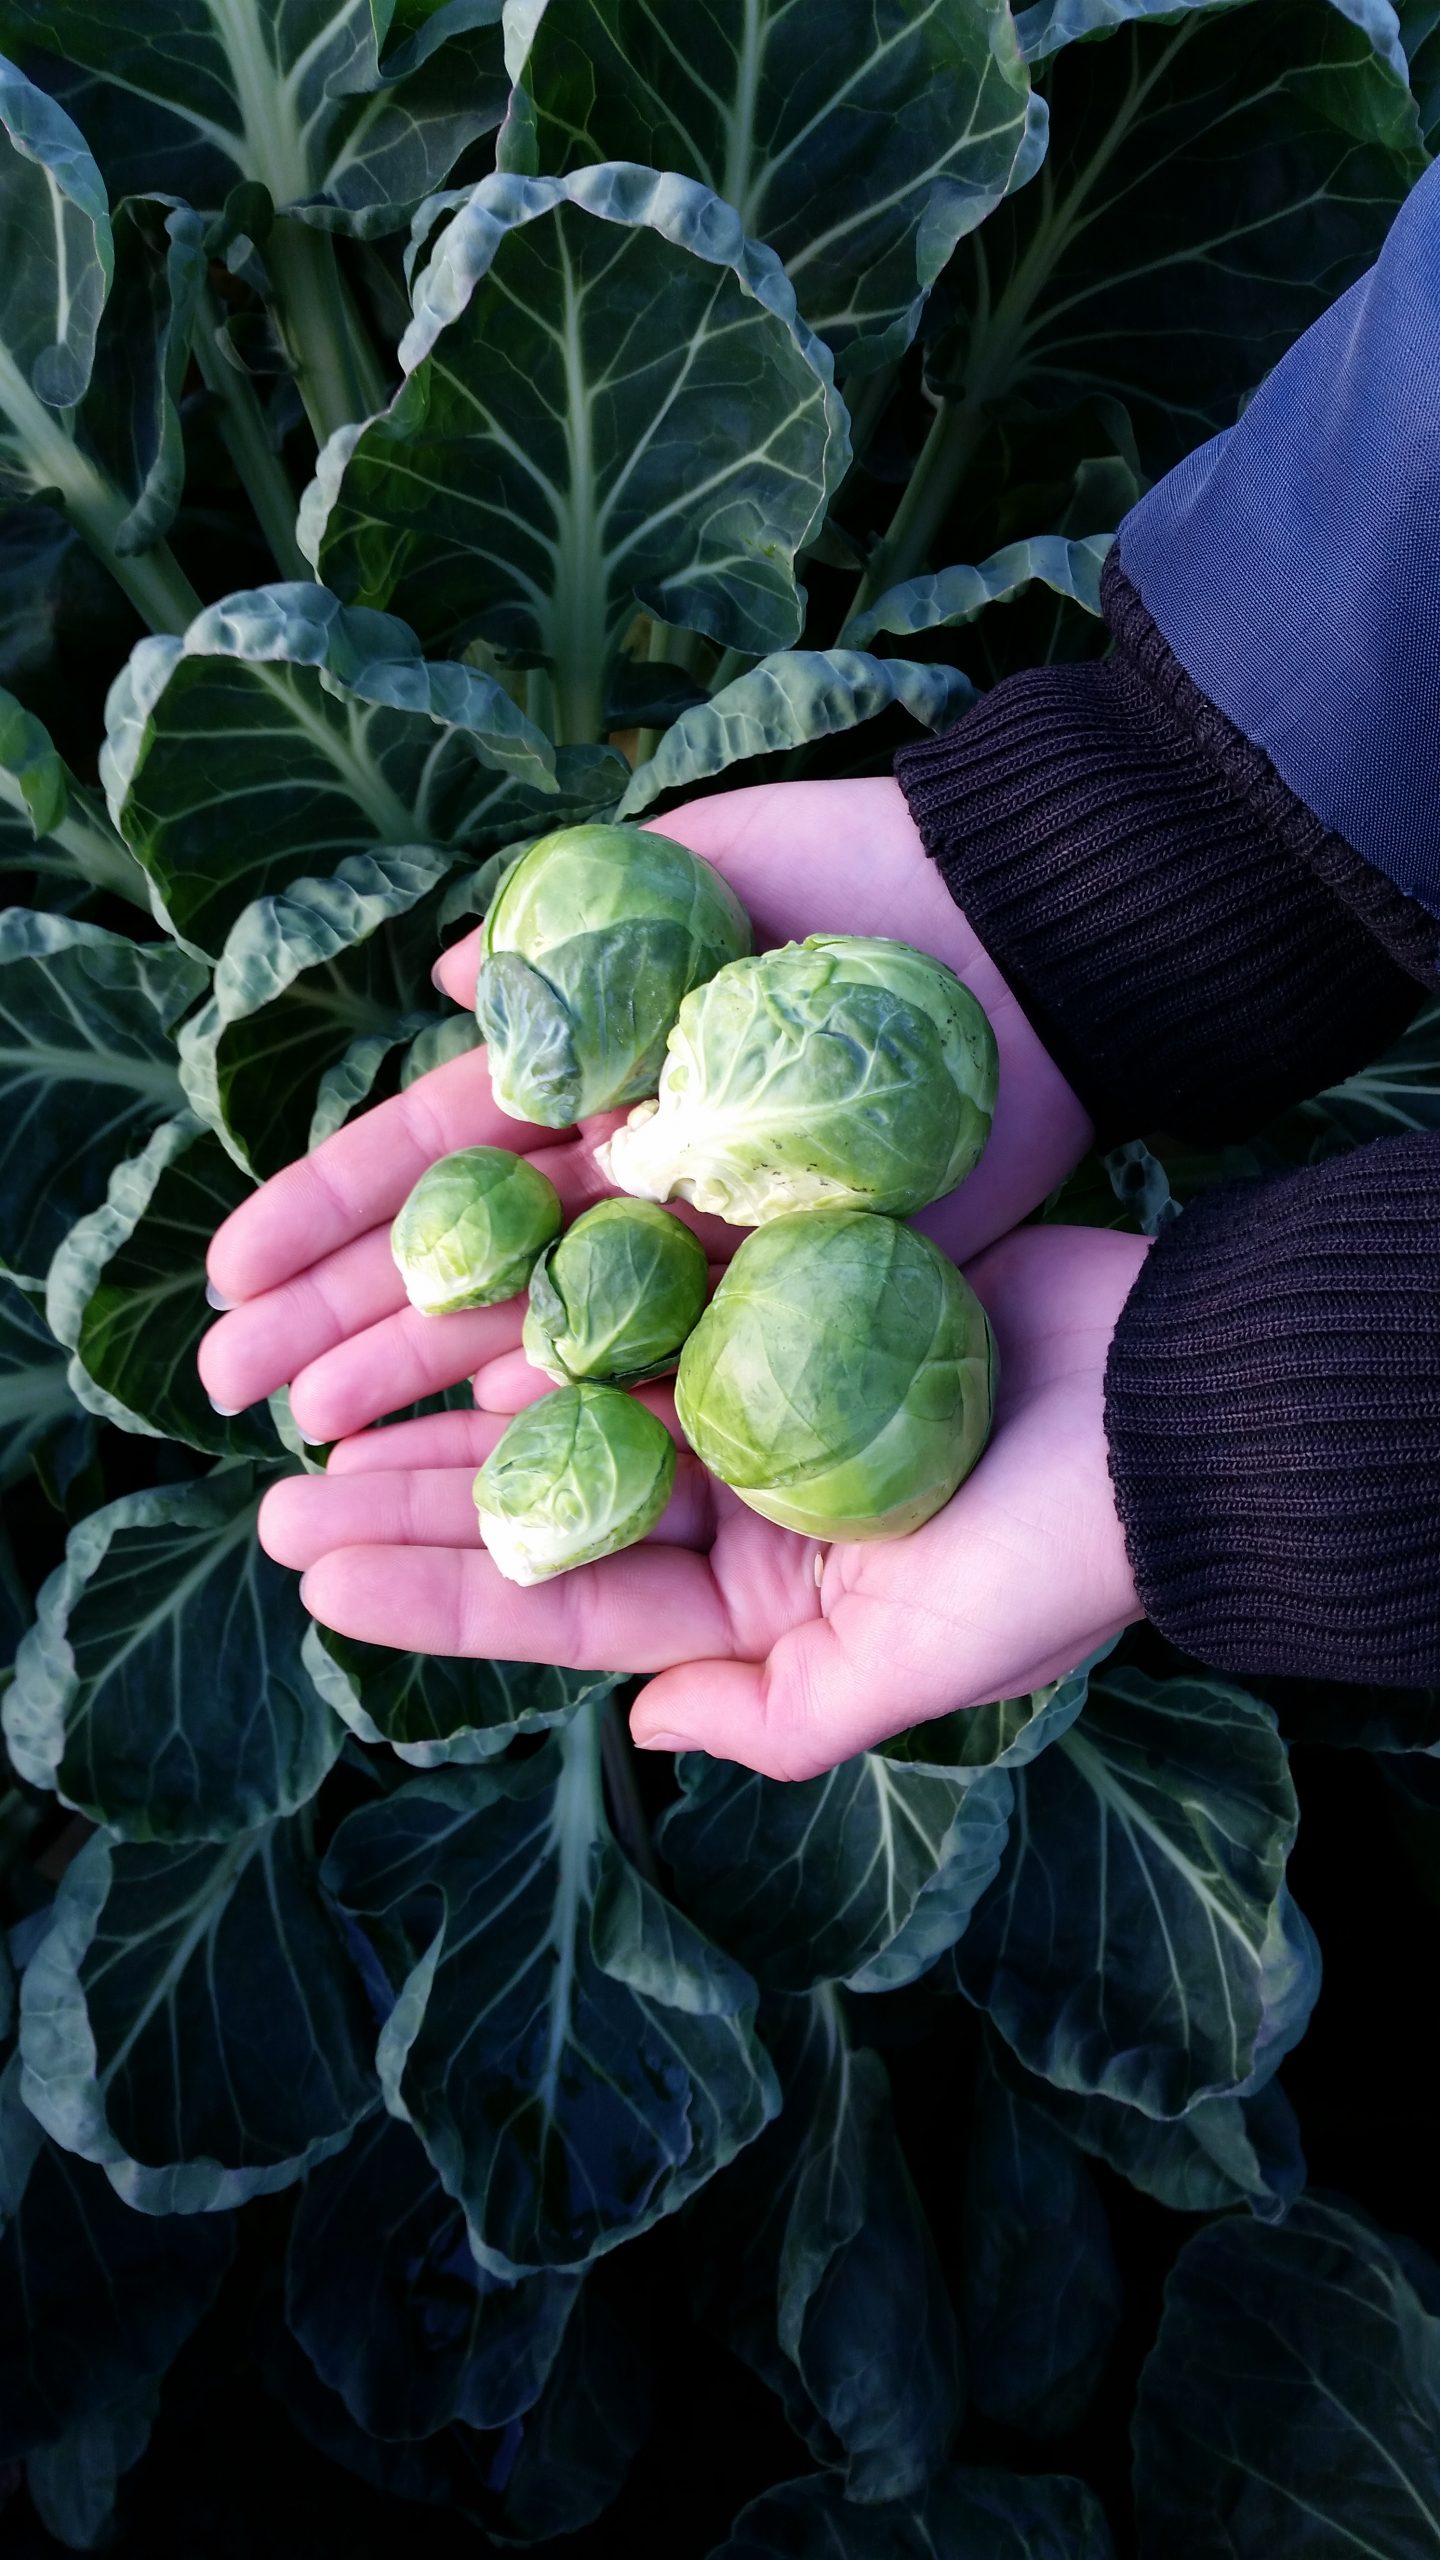 Brussels sprouts are a traditional part of the Christmas dinner in the UK and Tesco says this year’s will be much bigger than usual thanks to an unseasonably warm autumn in Britain.